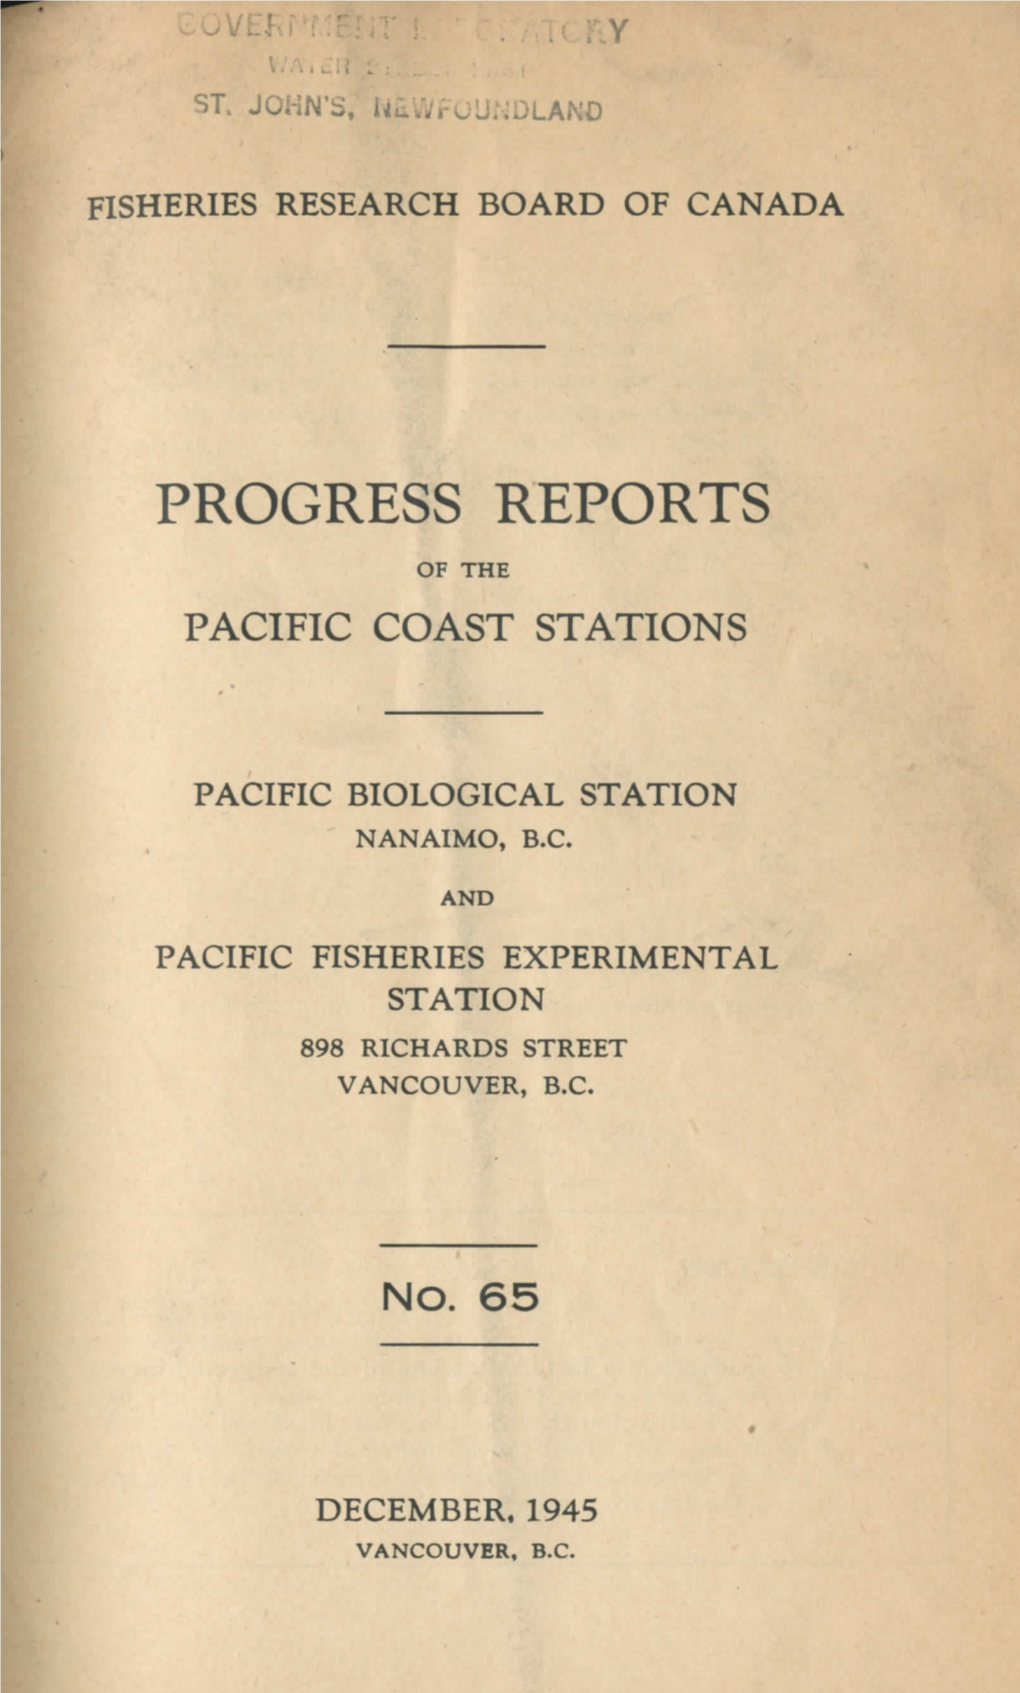 Progress Reports of the Pacific Coast Stations